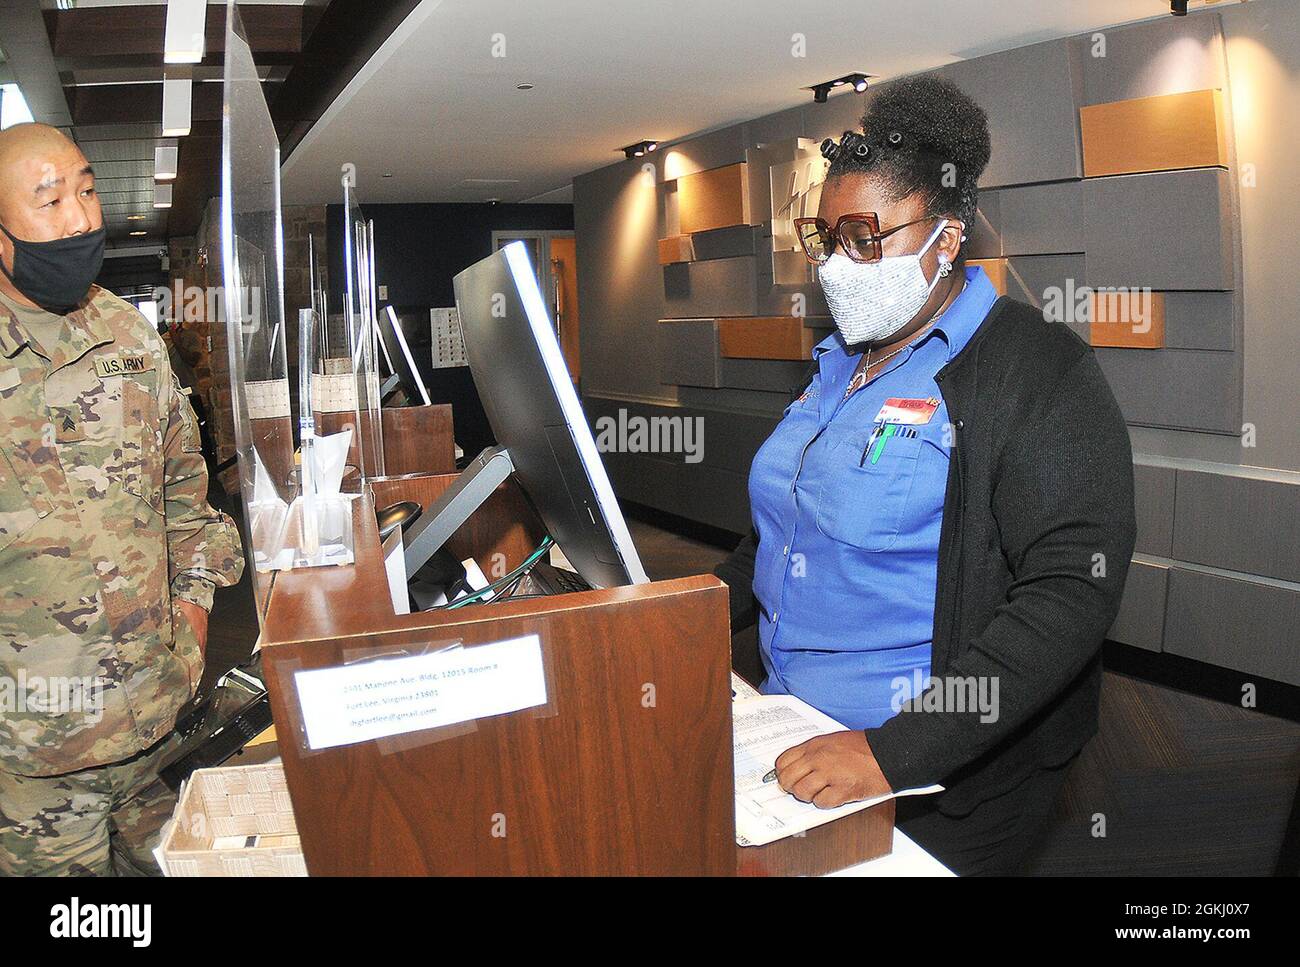 Holiday Inn Express employee Tylisha Hagood tends to a customer at the Fort  Lee Holiday Inn Express April 28. A front desk agent, Hagood said there a  lot to like about the